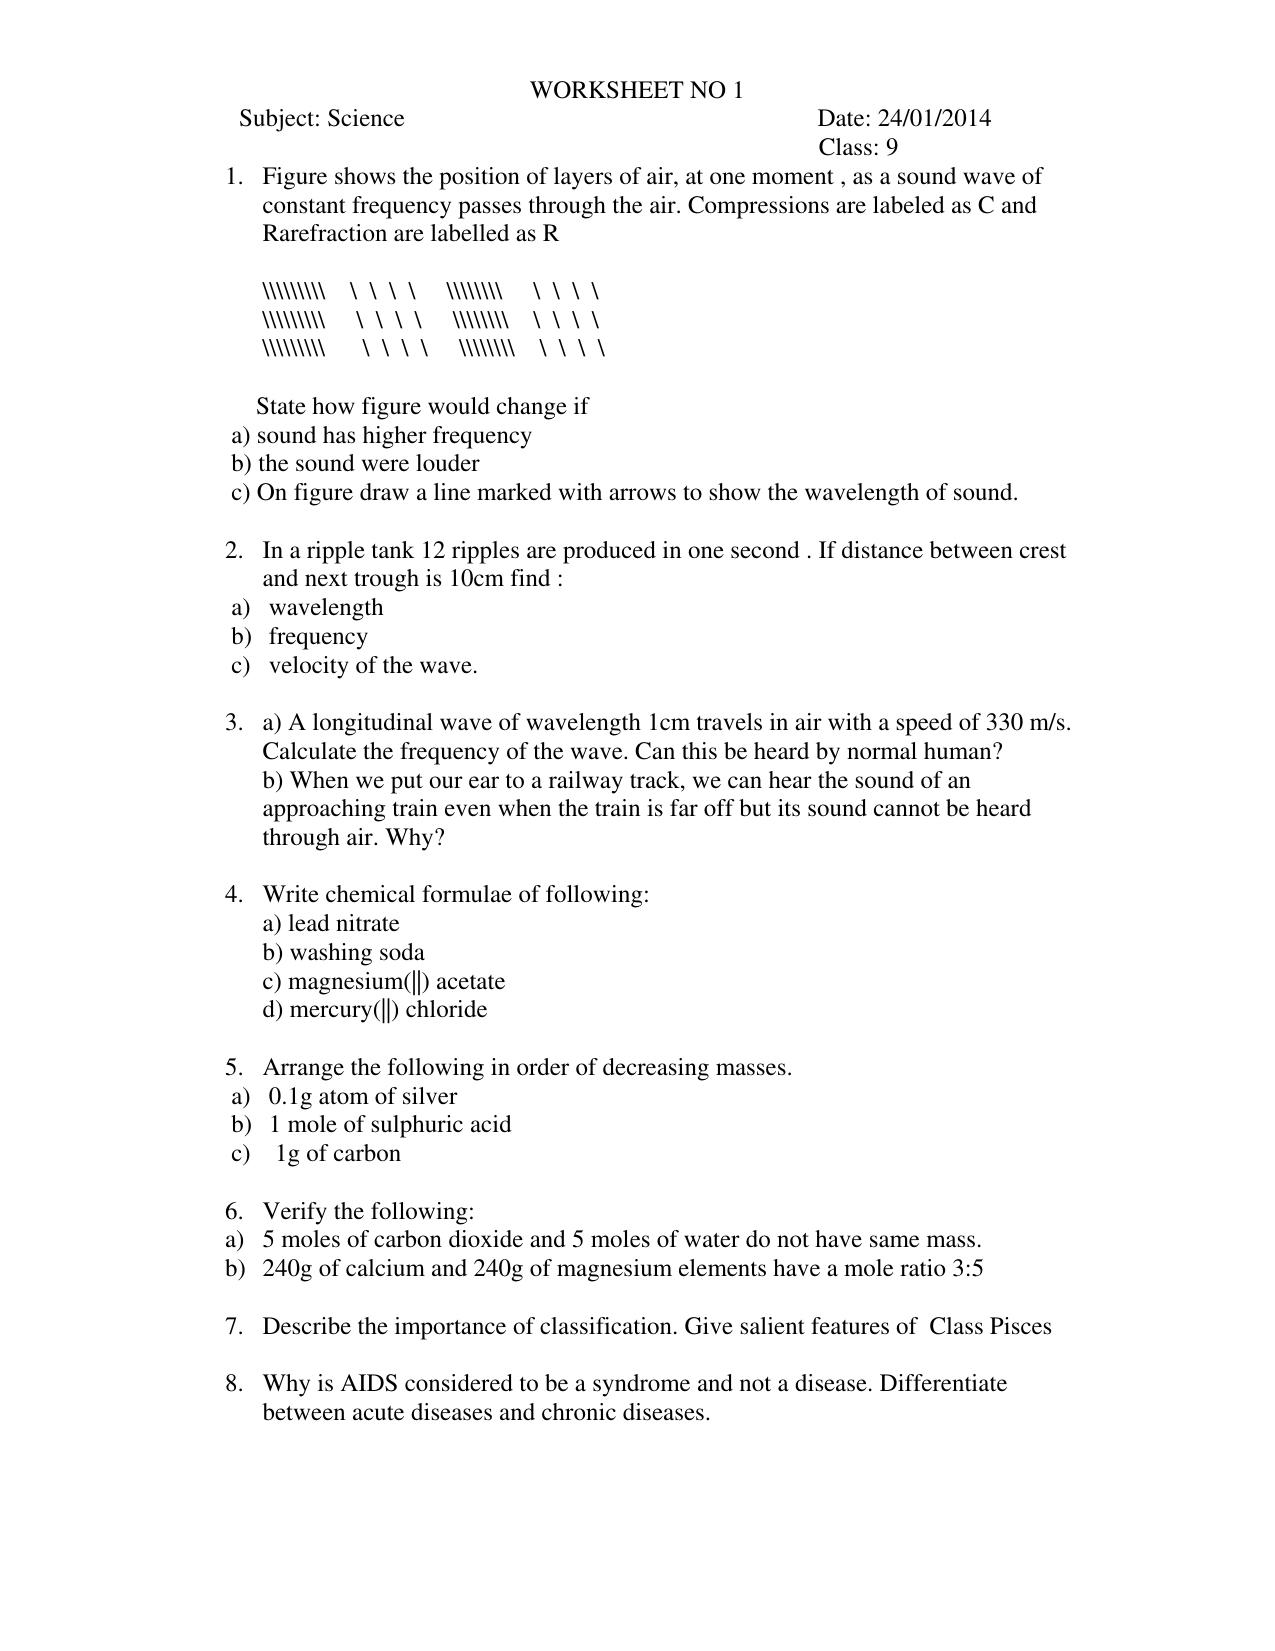 CBSE Worksheets for Class 9 Science Assignment 10 - Page 1